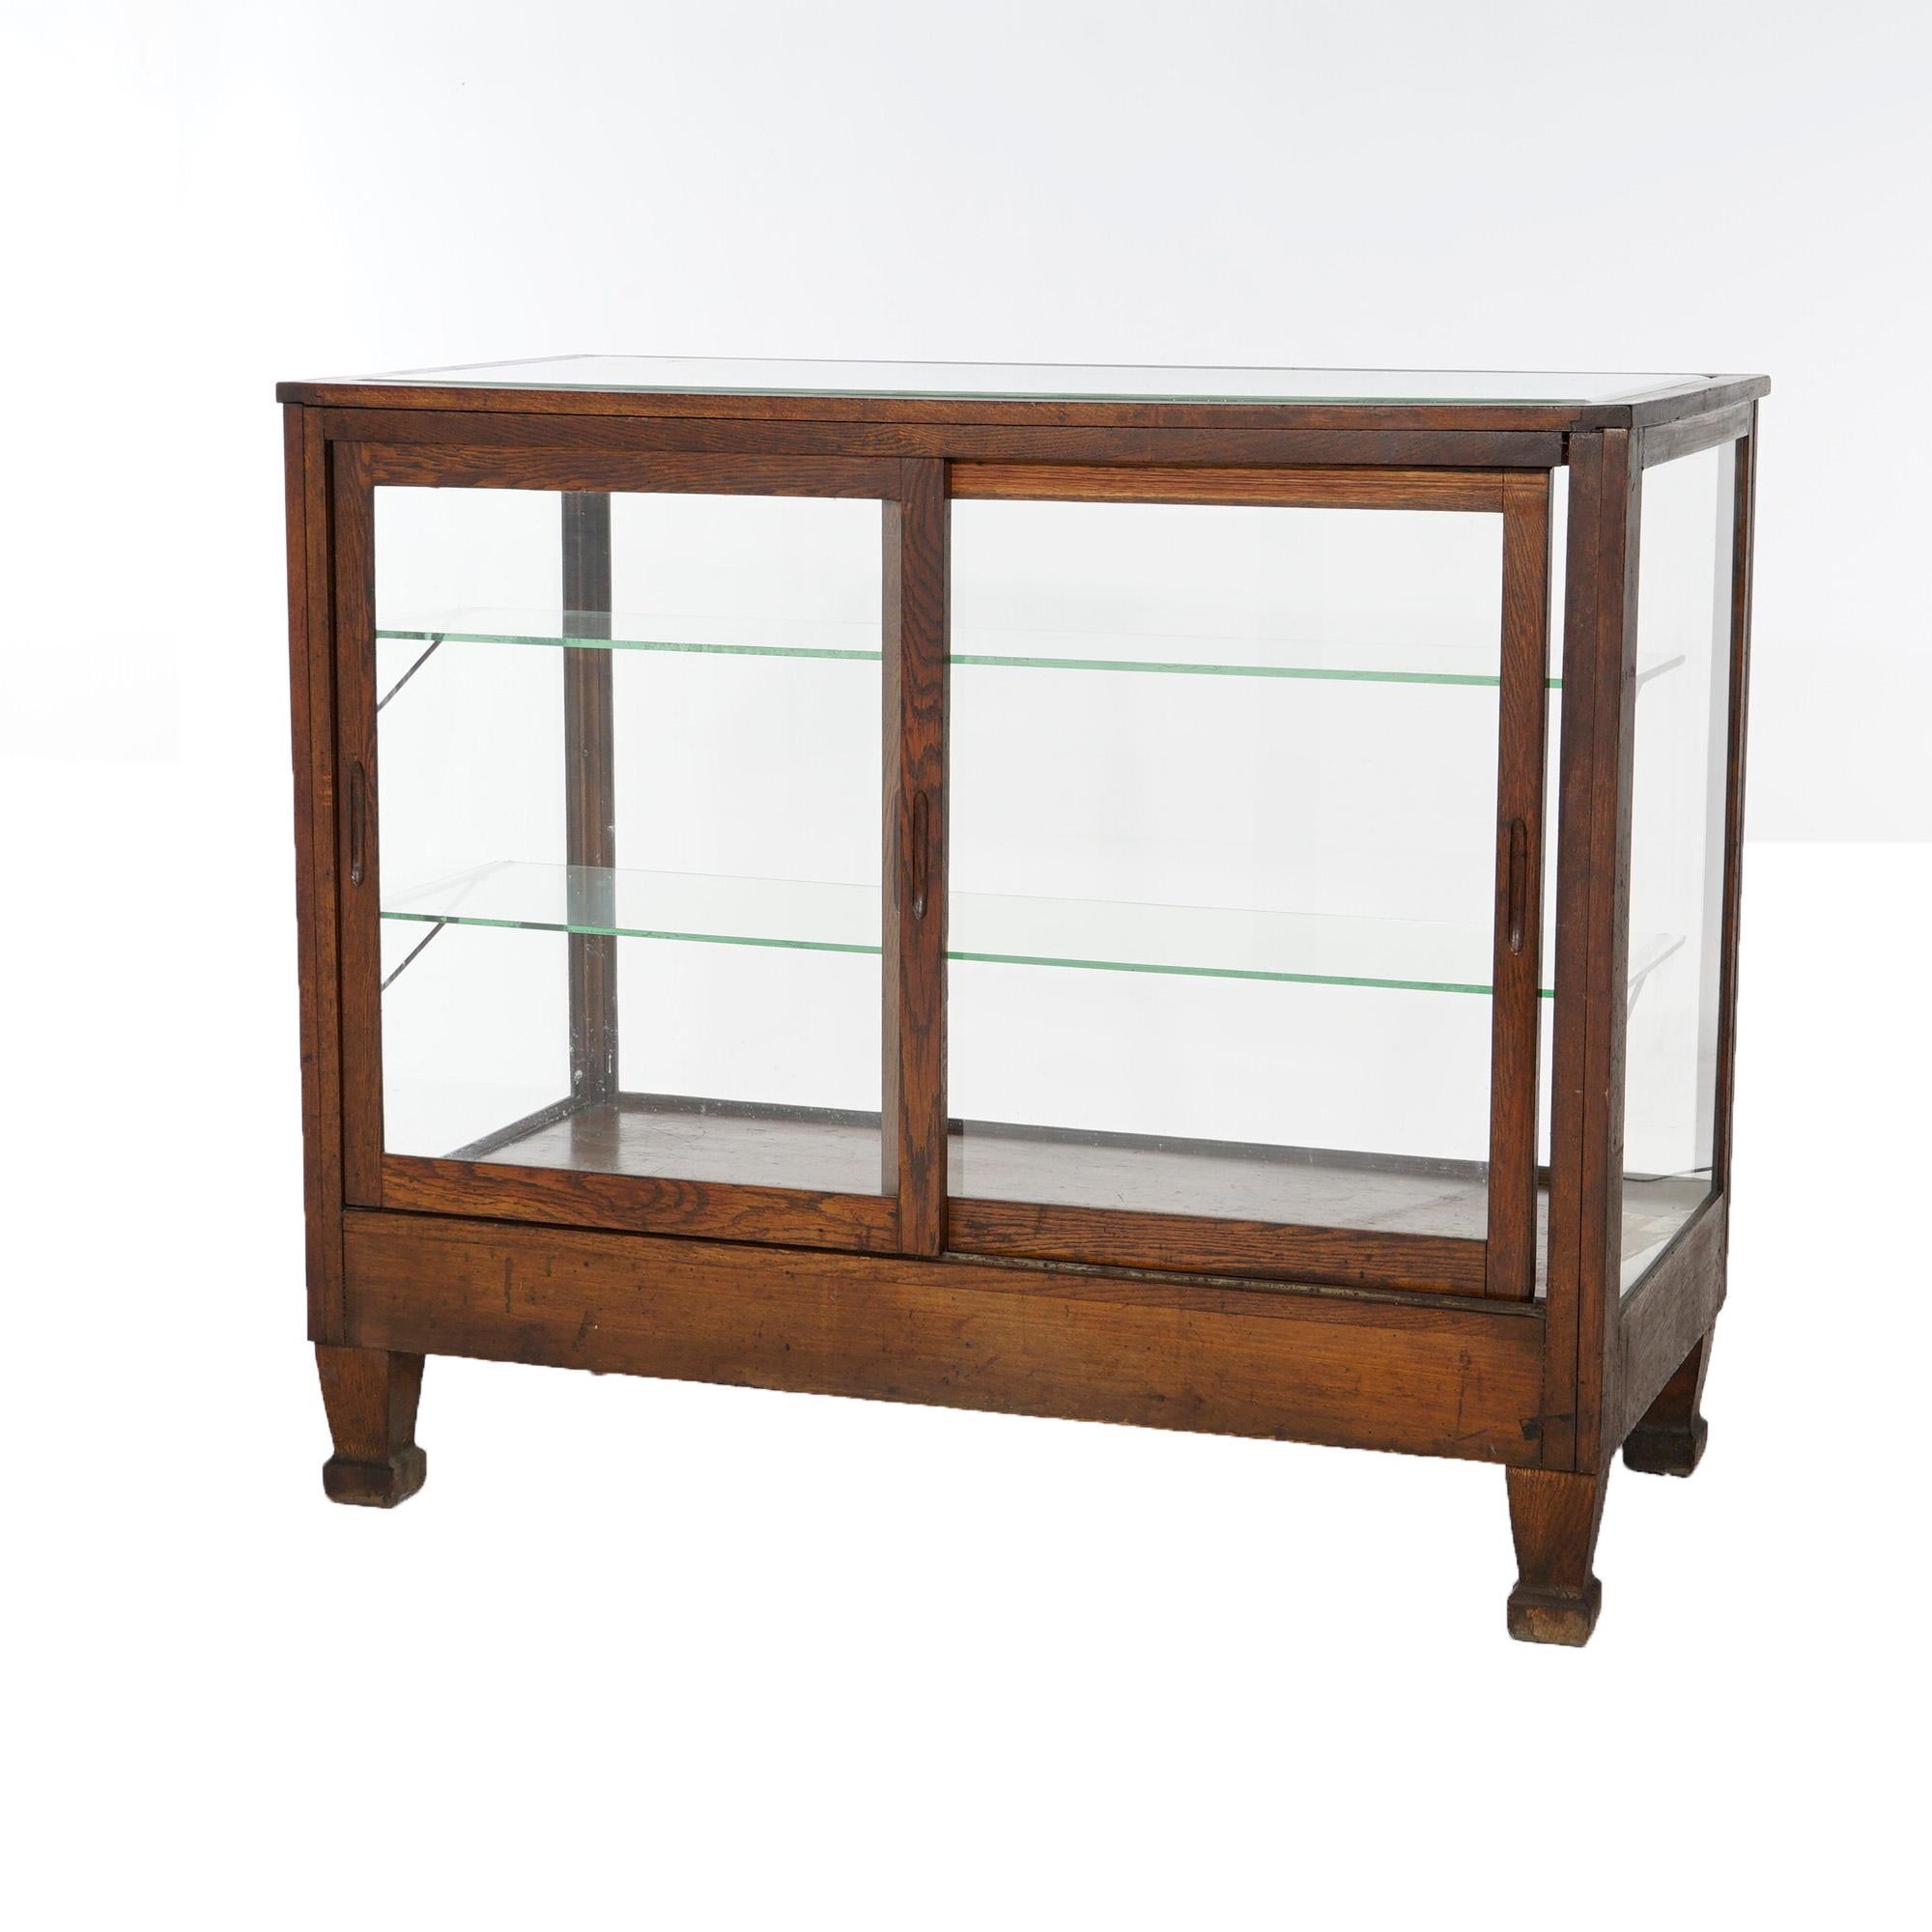 American Antique Arts & Crafts Oak & Glass Country Store Counter Display Showcase, c1900